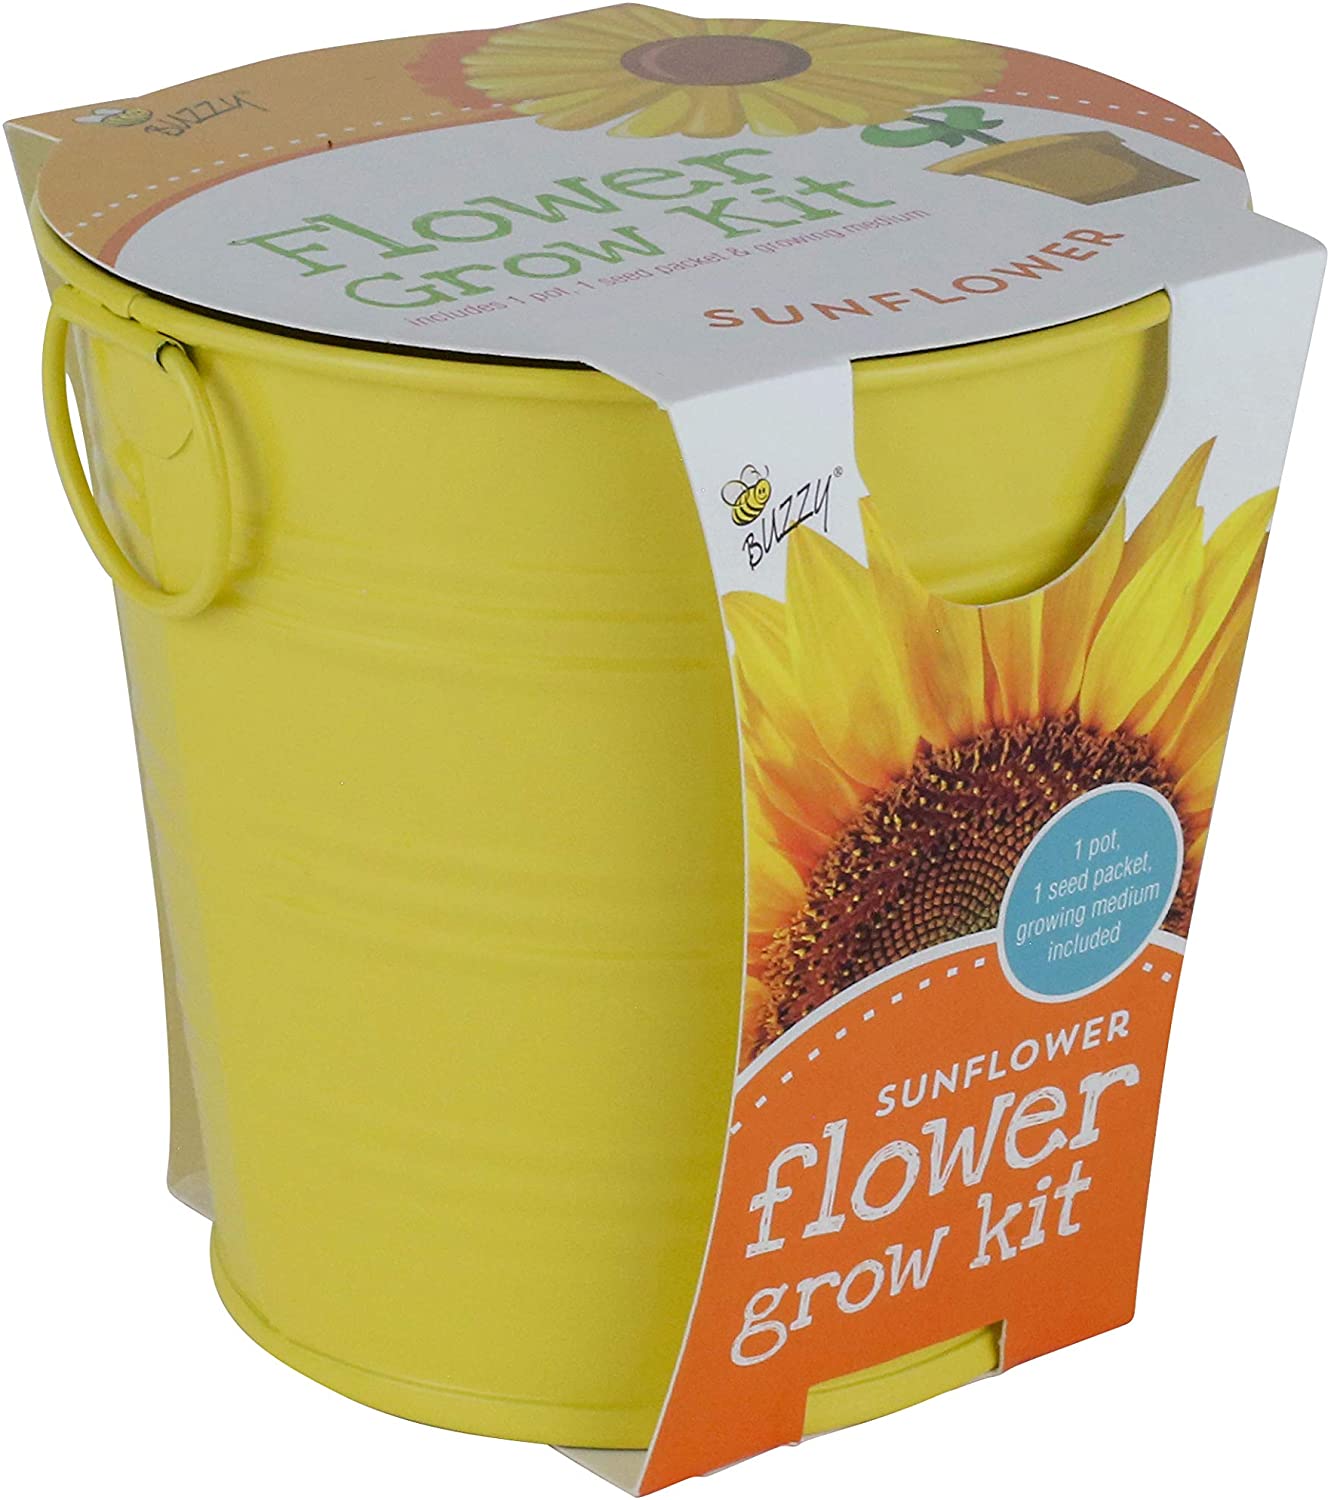 SUNFLOWER SQUISHABLE - THE TOY STORE